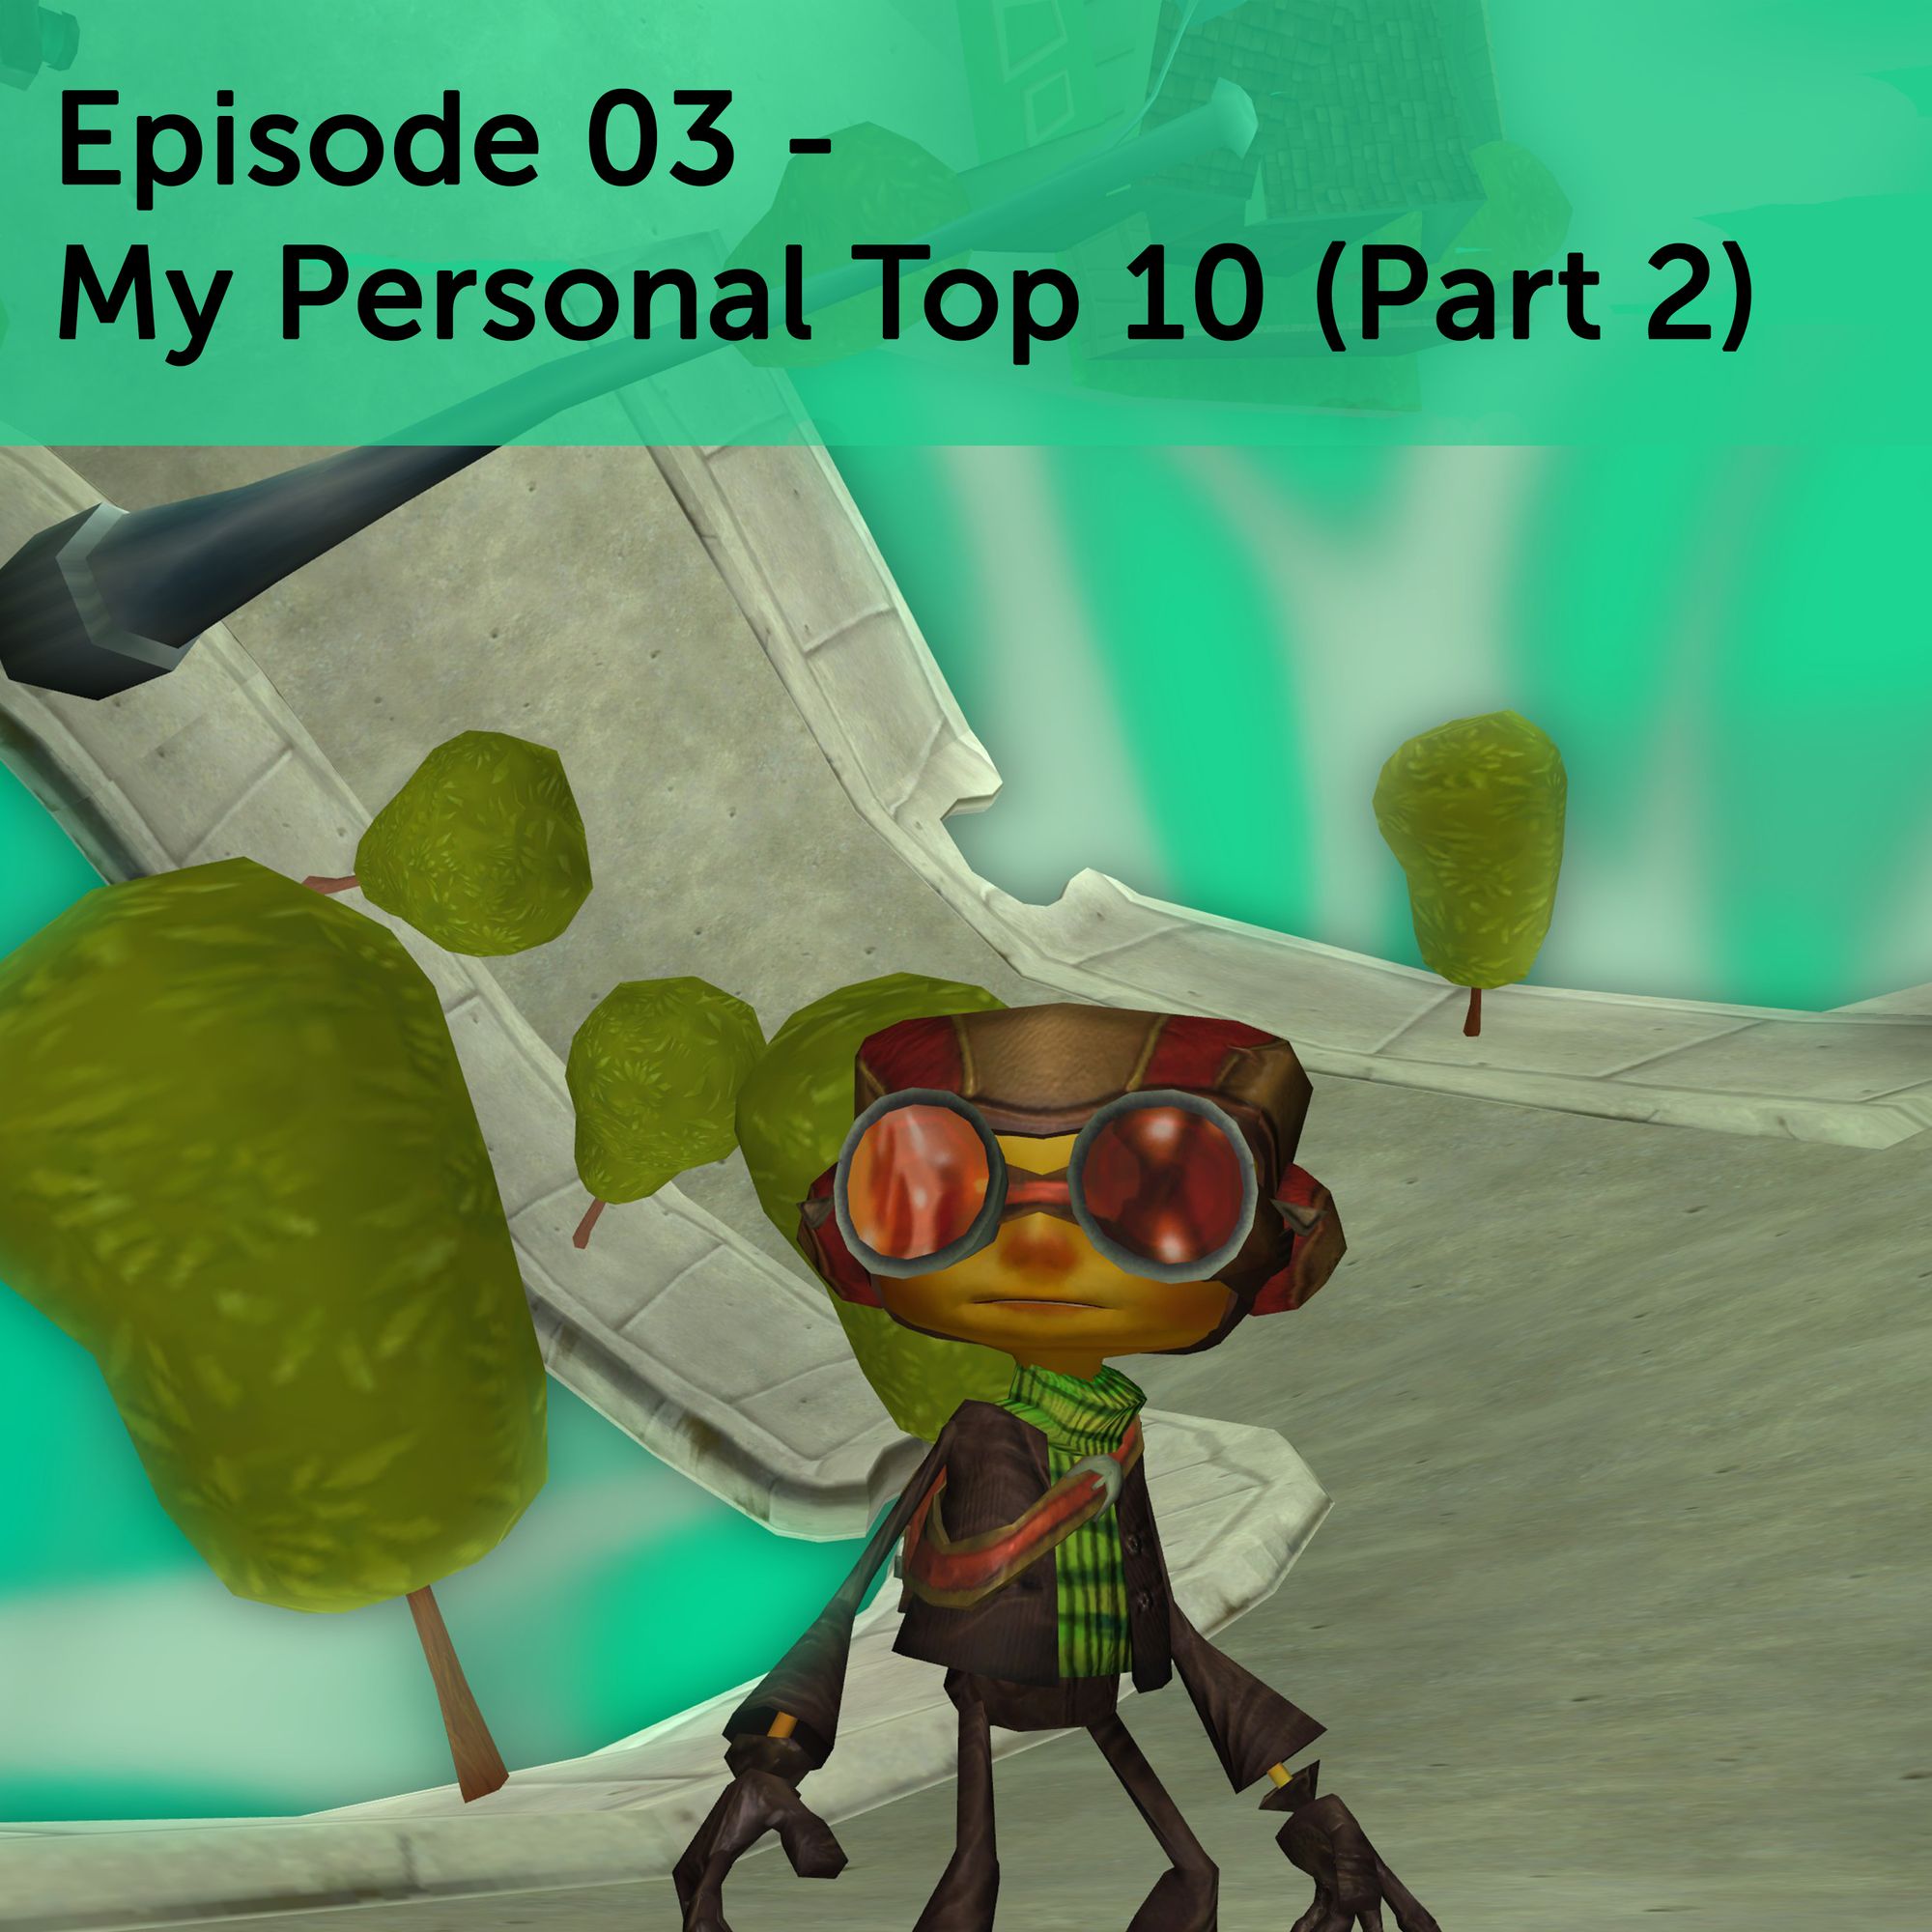 Episode 03 - My Personal Top 10 (Part 2)